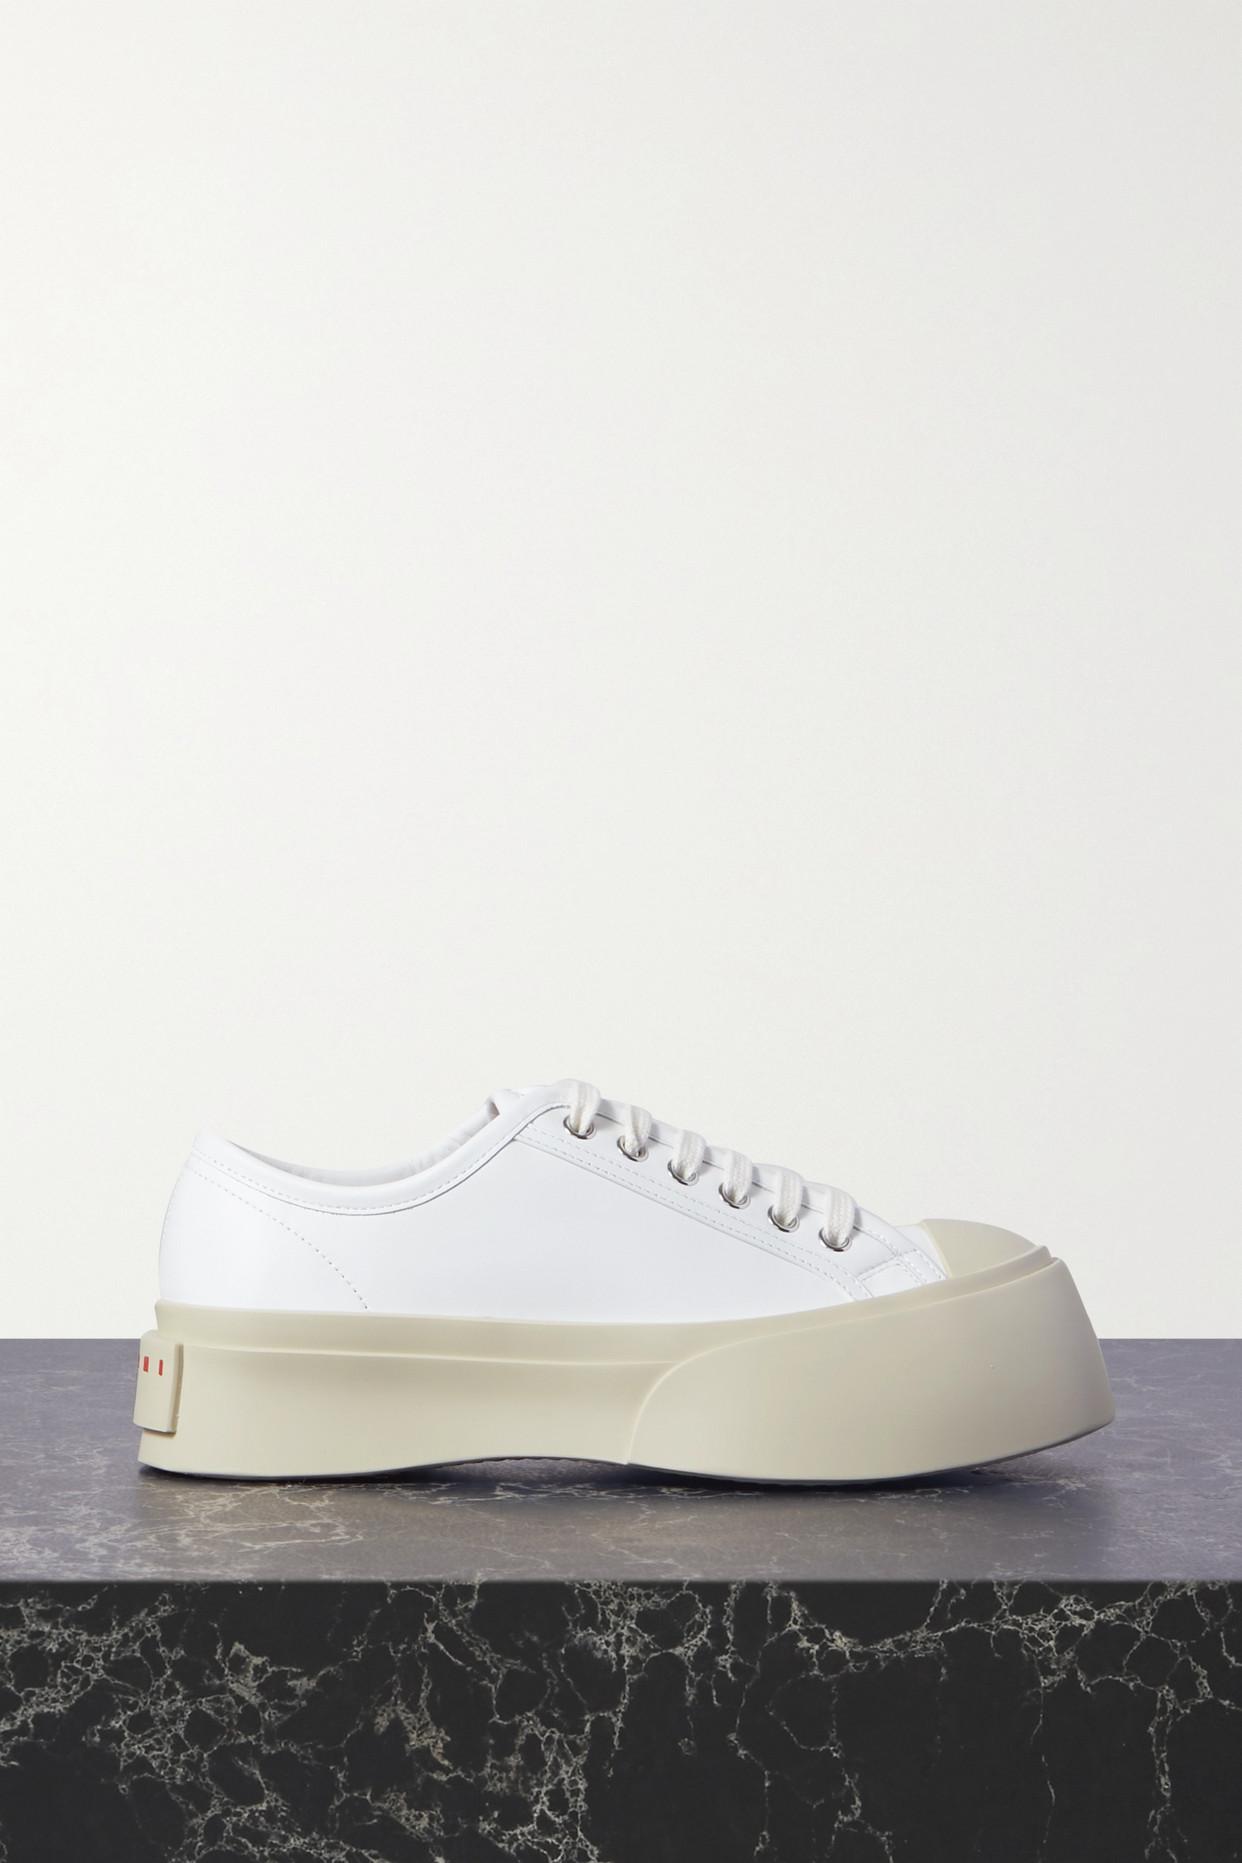 Marni Pablo Leather Platform Sneakers in White | Lyst UK